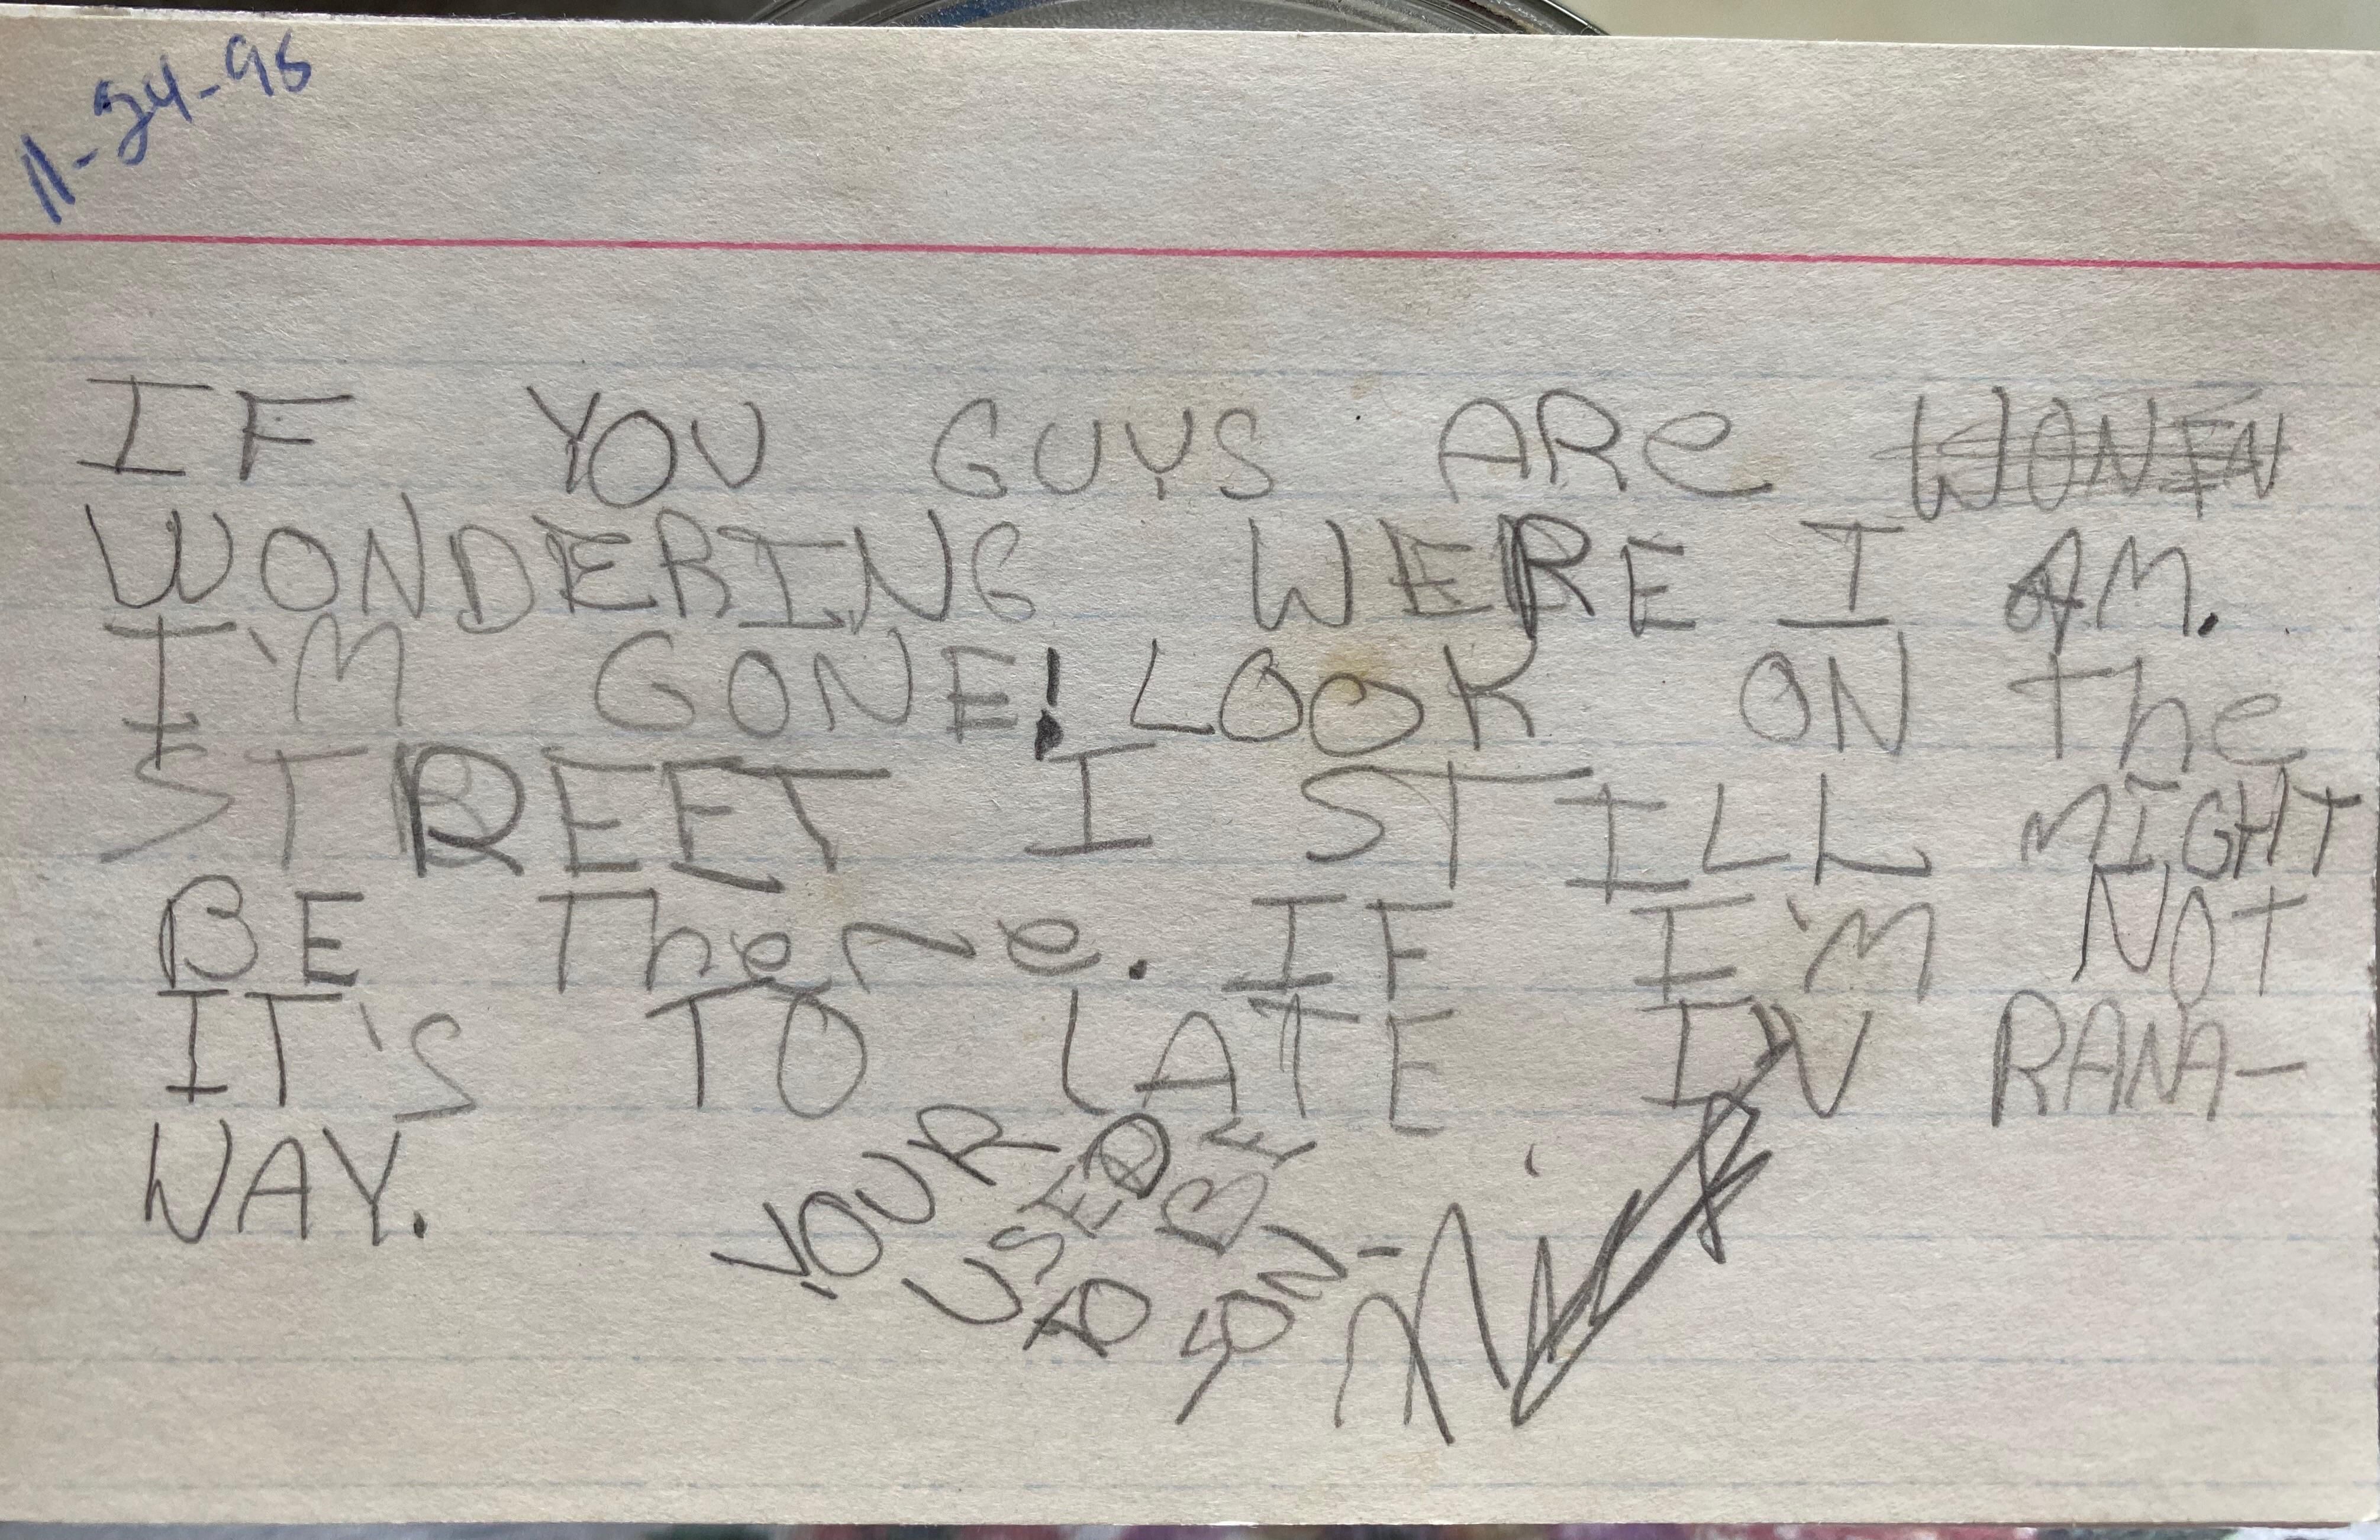 This note from my brother to my parents in 1995